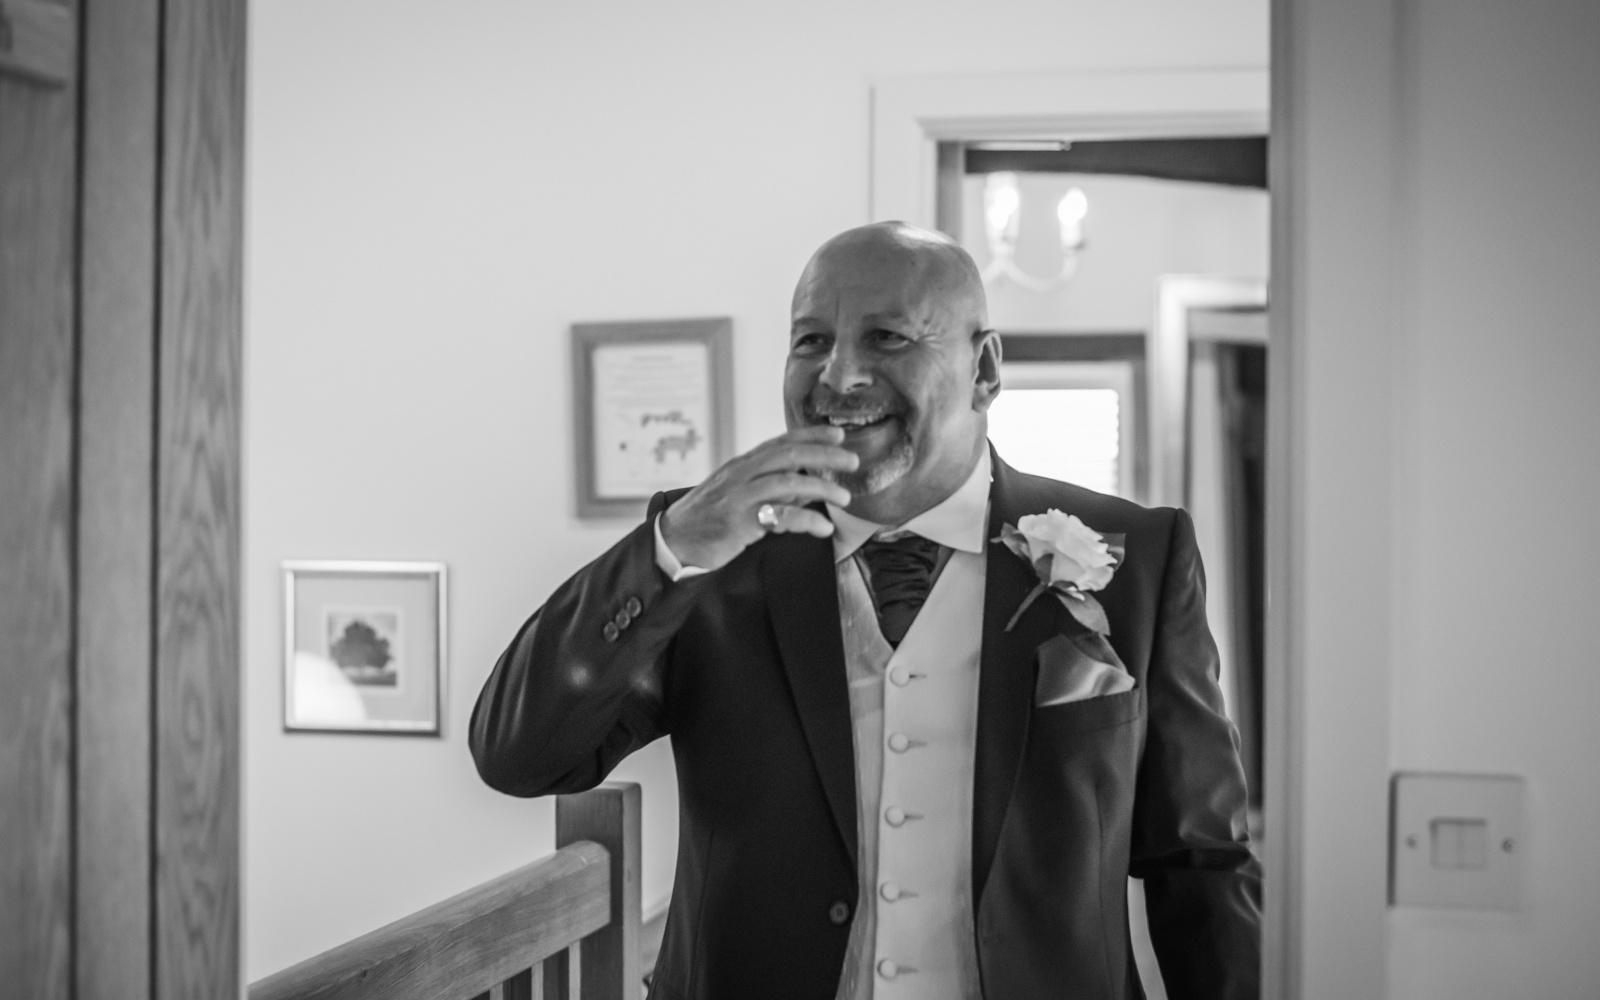 Real Wedding Strike A Pose Photography Wiltshire wedding photographer Kingscote Barn Tetbury Gloucestershire father of the bride daughter in bridal gown